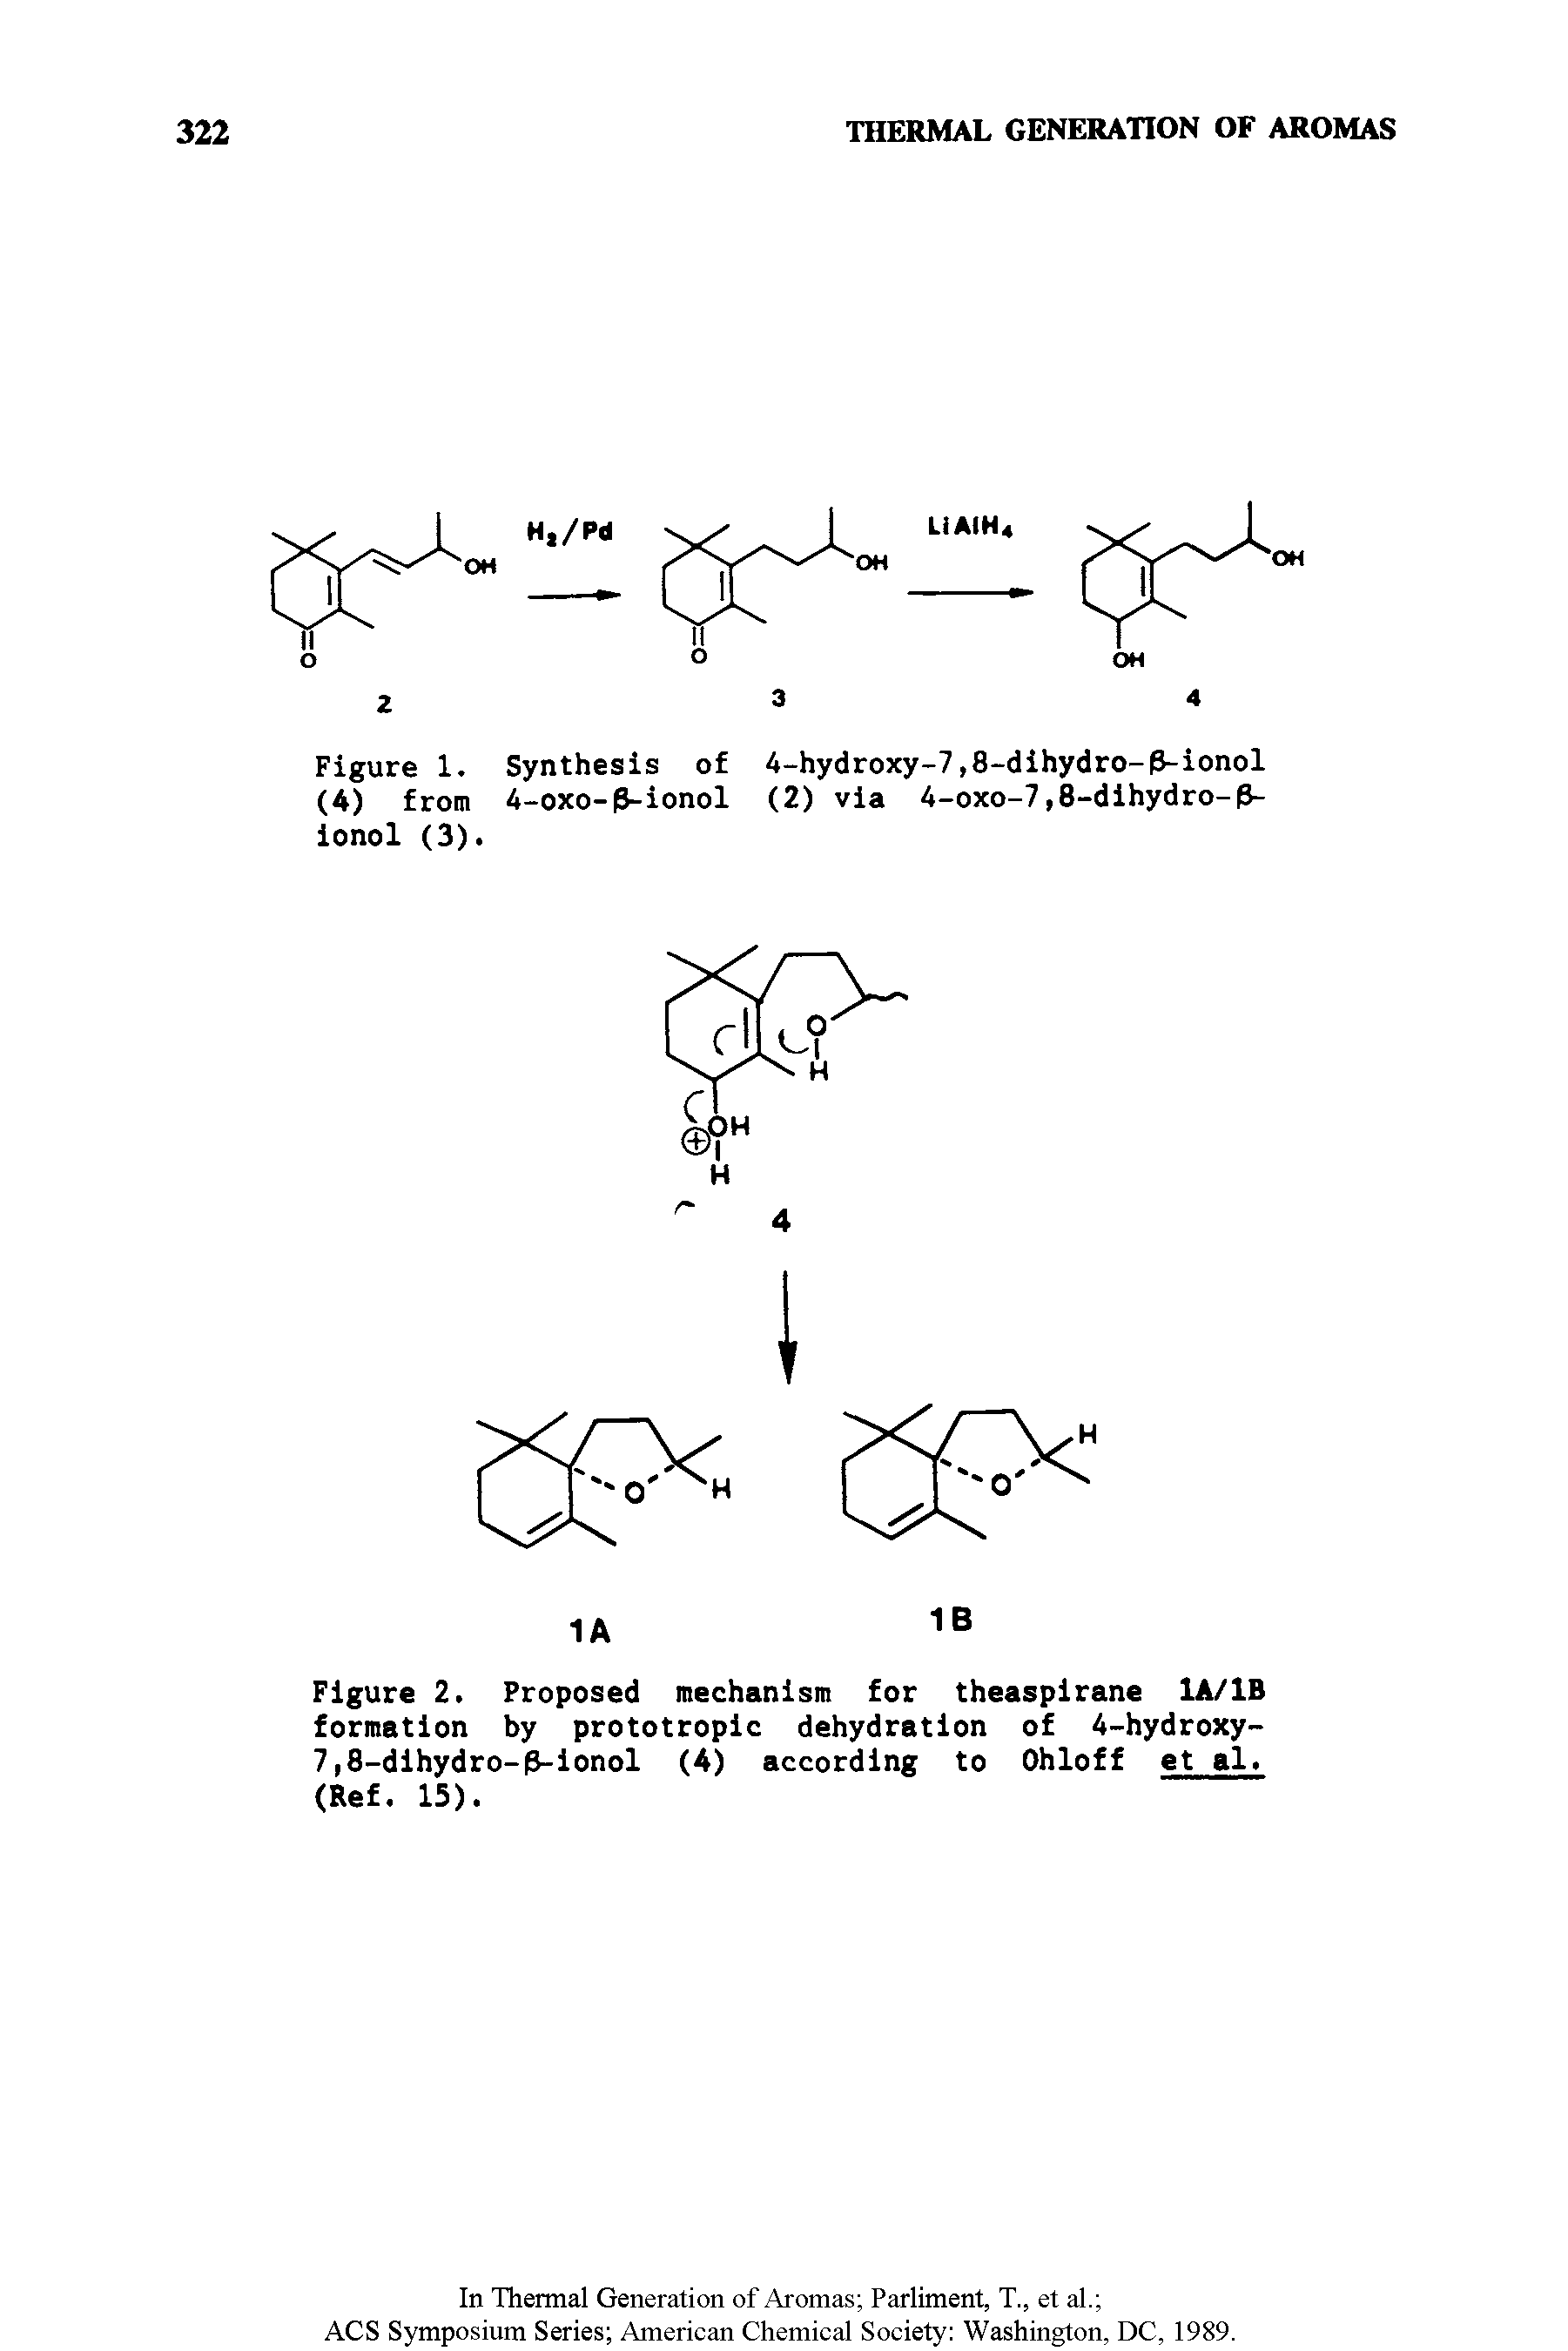 Figure 2. Proposed mechanism for theaspirane 1A/1B formation by prototropic dehydration of 4-hydroxy-7,8-dihydro-P-ionol (4) according to Ohloff et al. (Ref. 15).